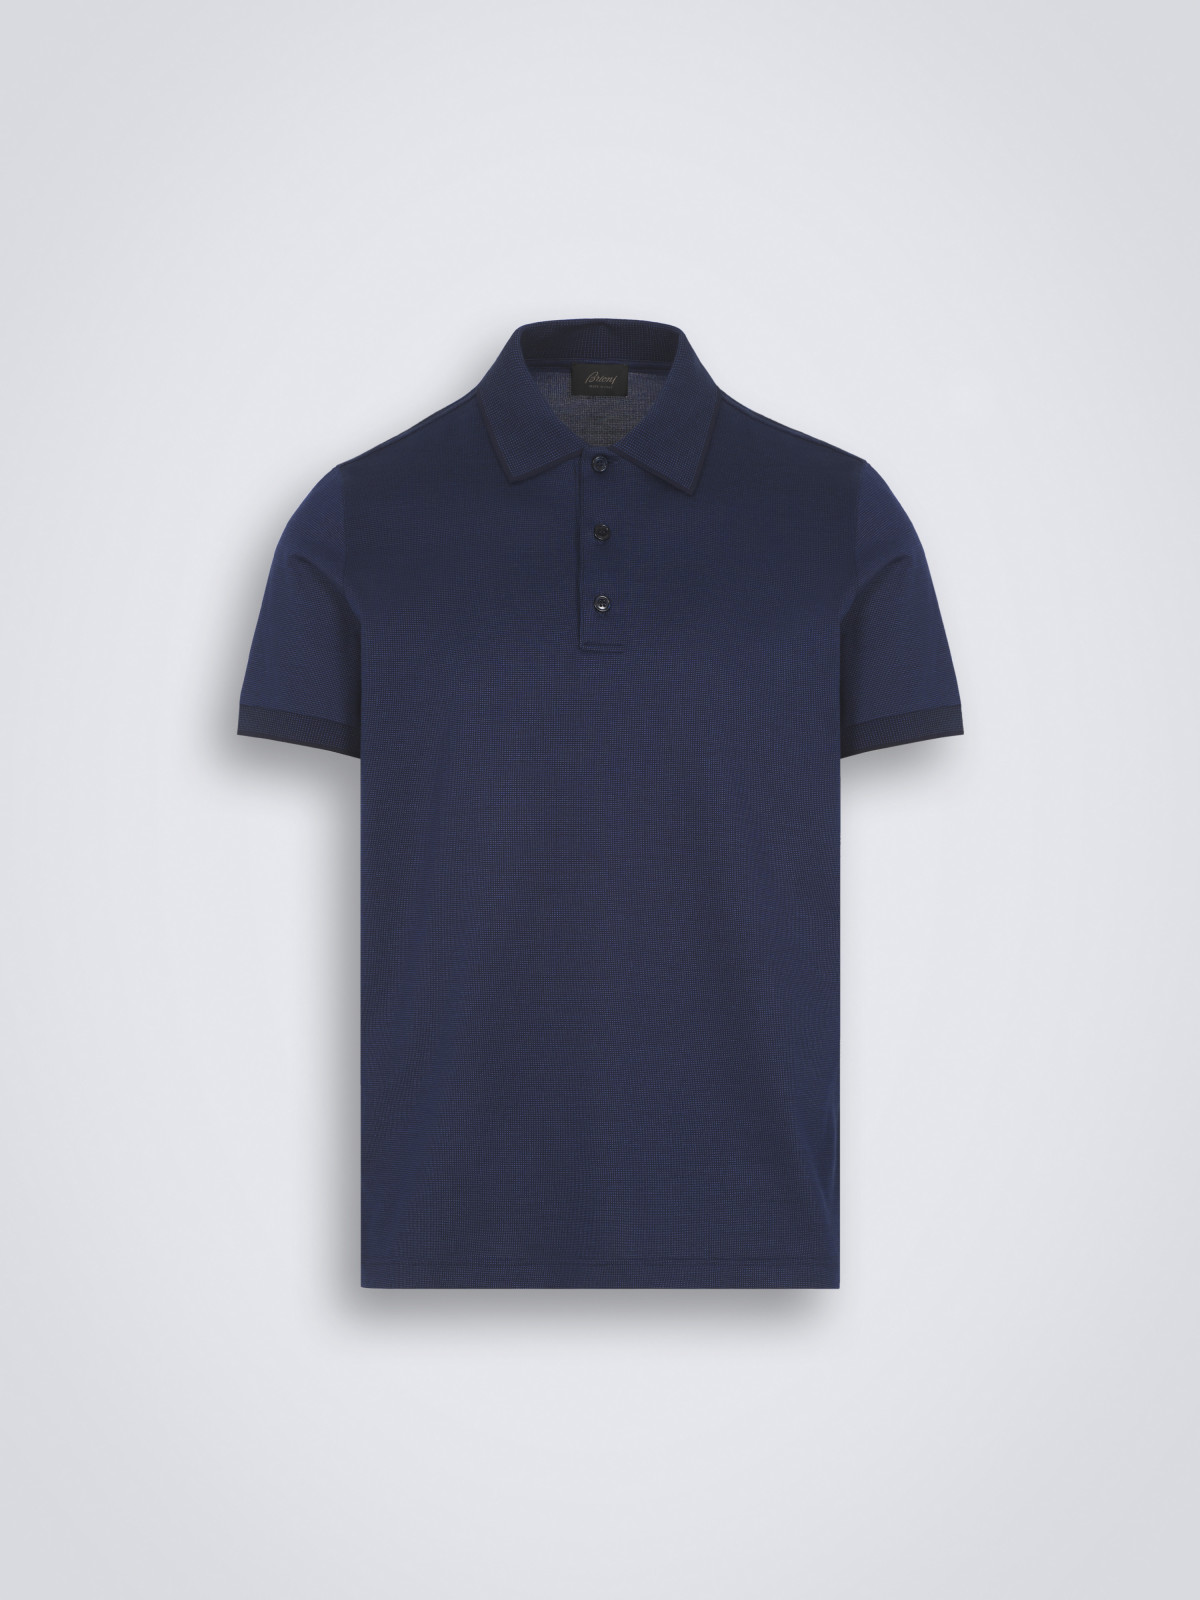 Navy blue and royal blue cotton polo | Brioni® US Official Store